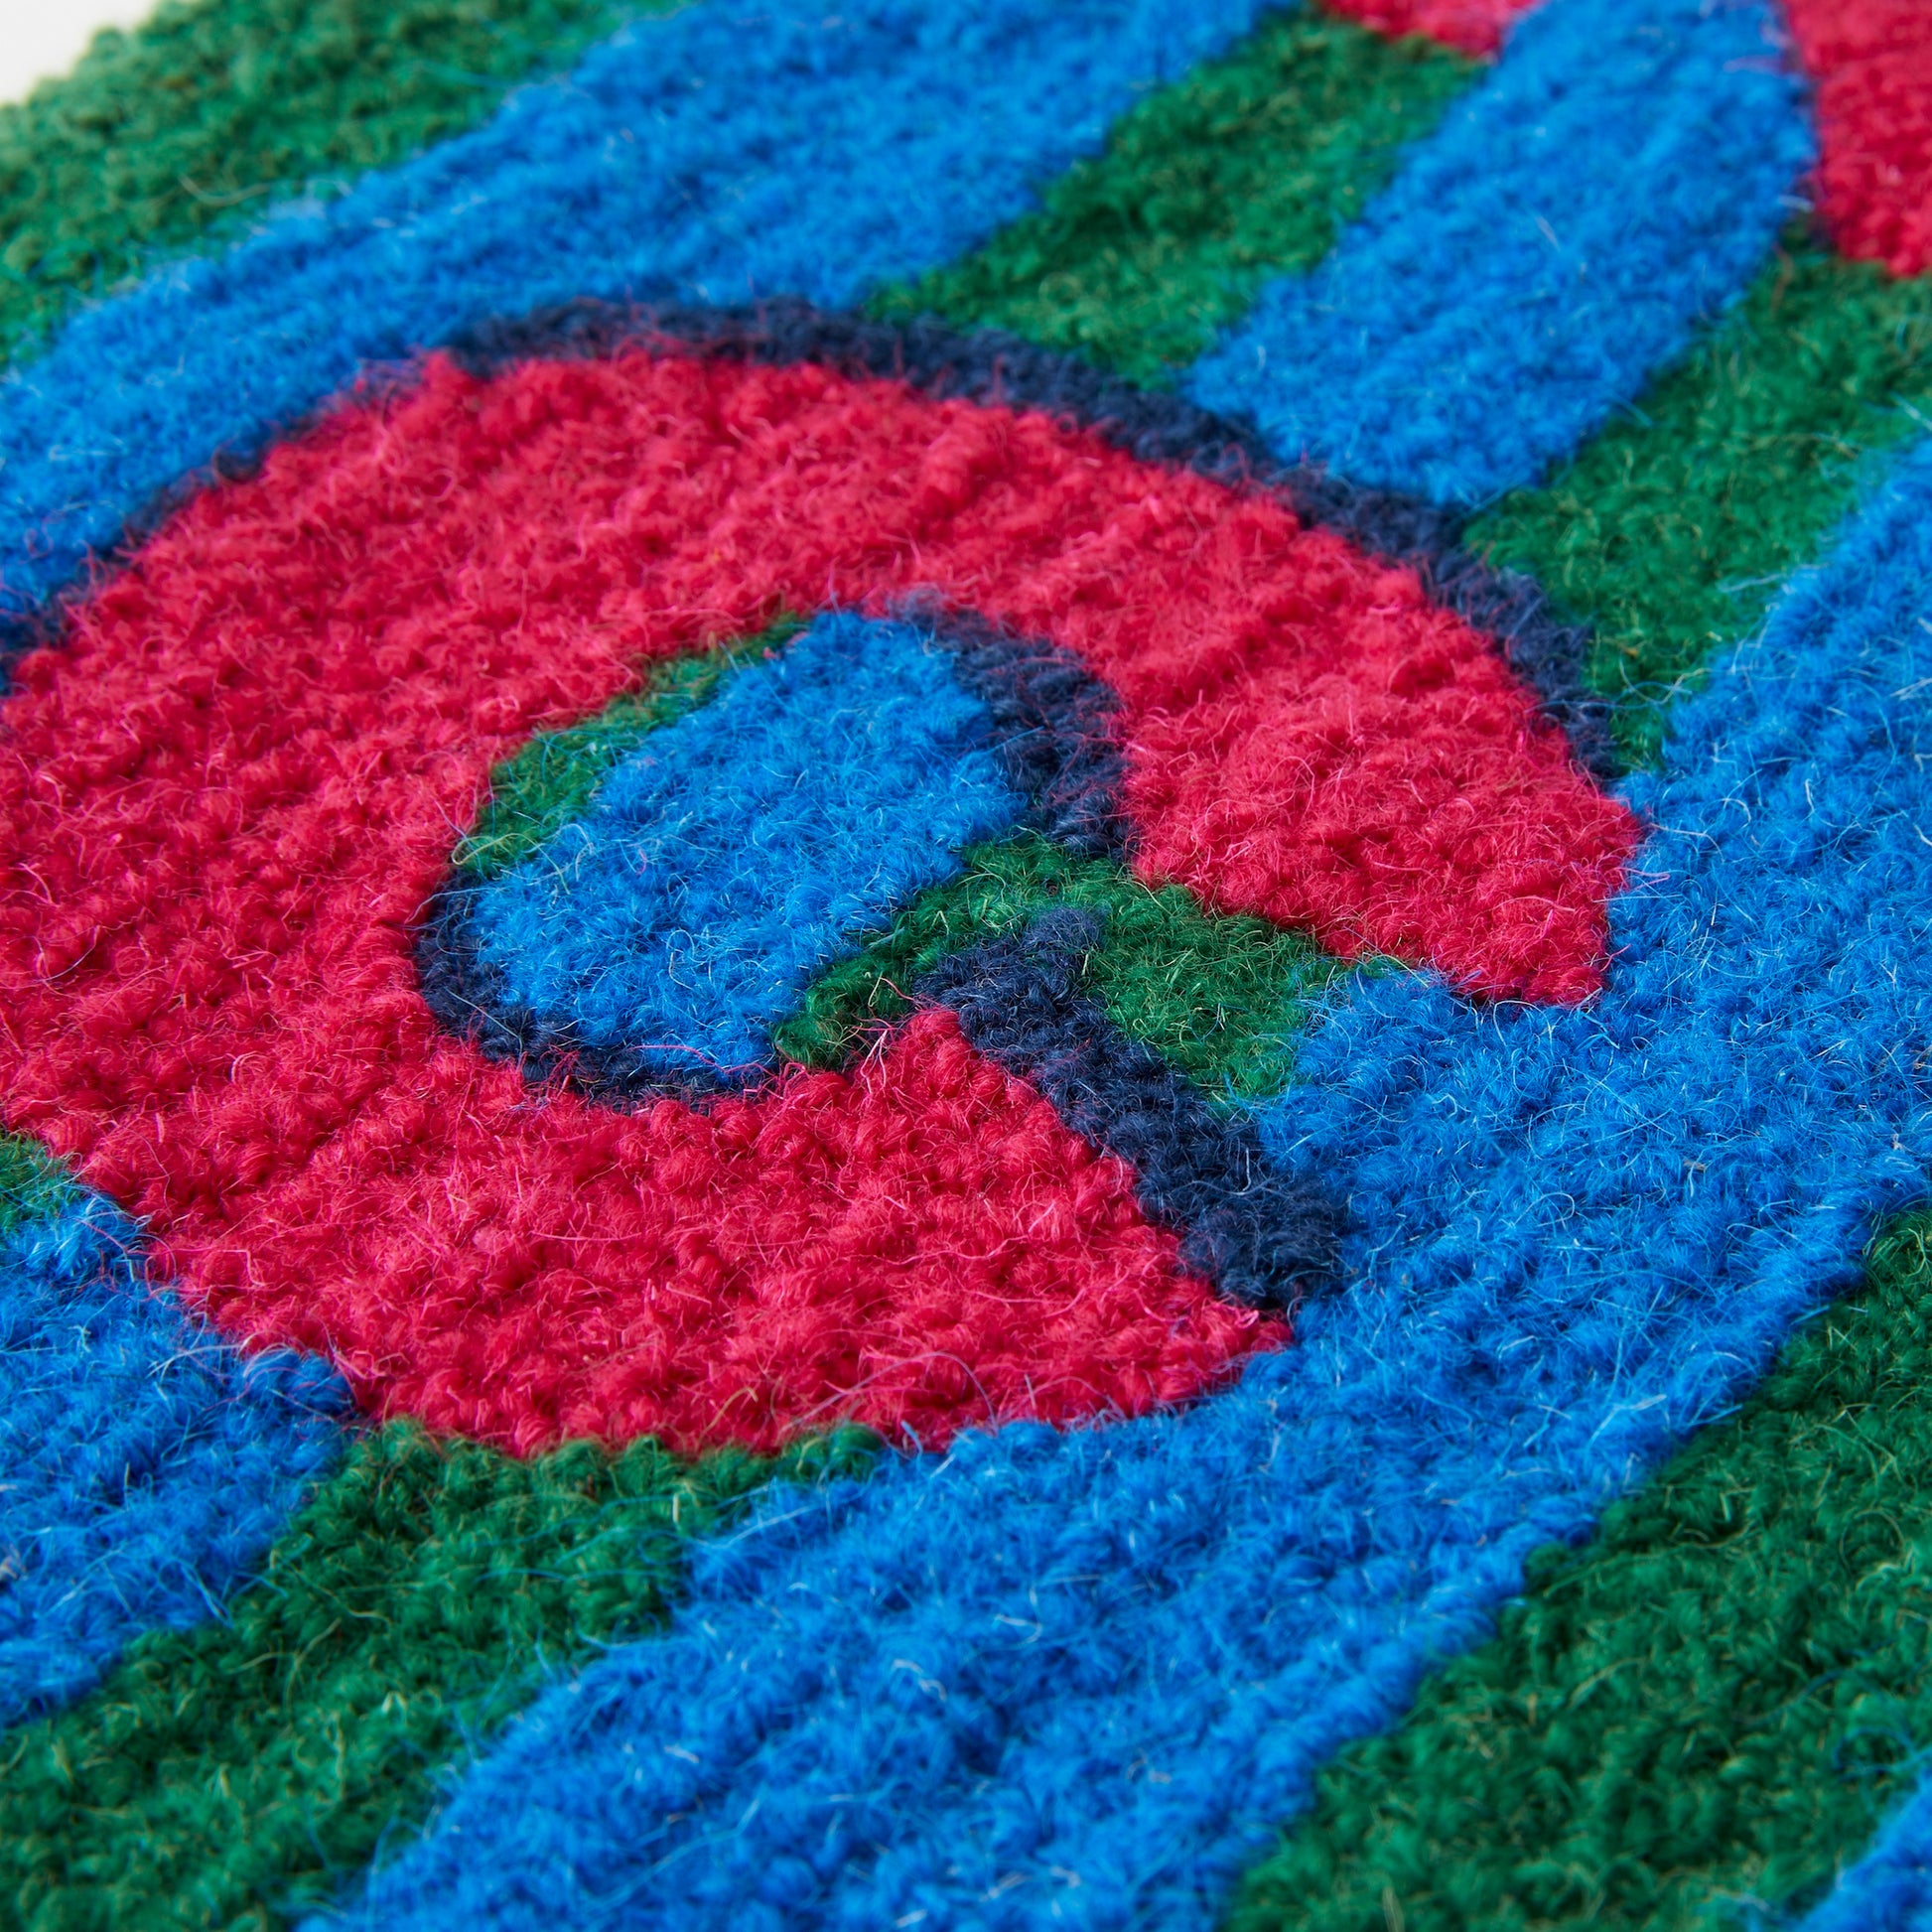 DANCE in a bold shadow text in Magenta, Navy and Bright Blue and Green Stripe background in a loop pile using reclaimed yarn close up.